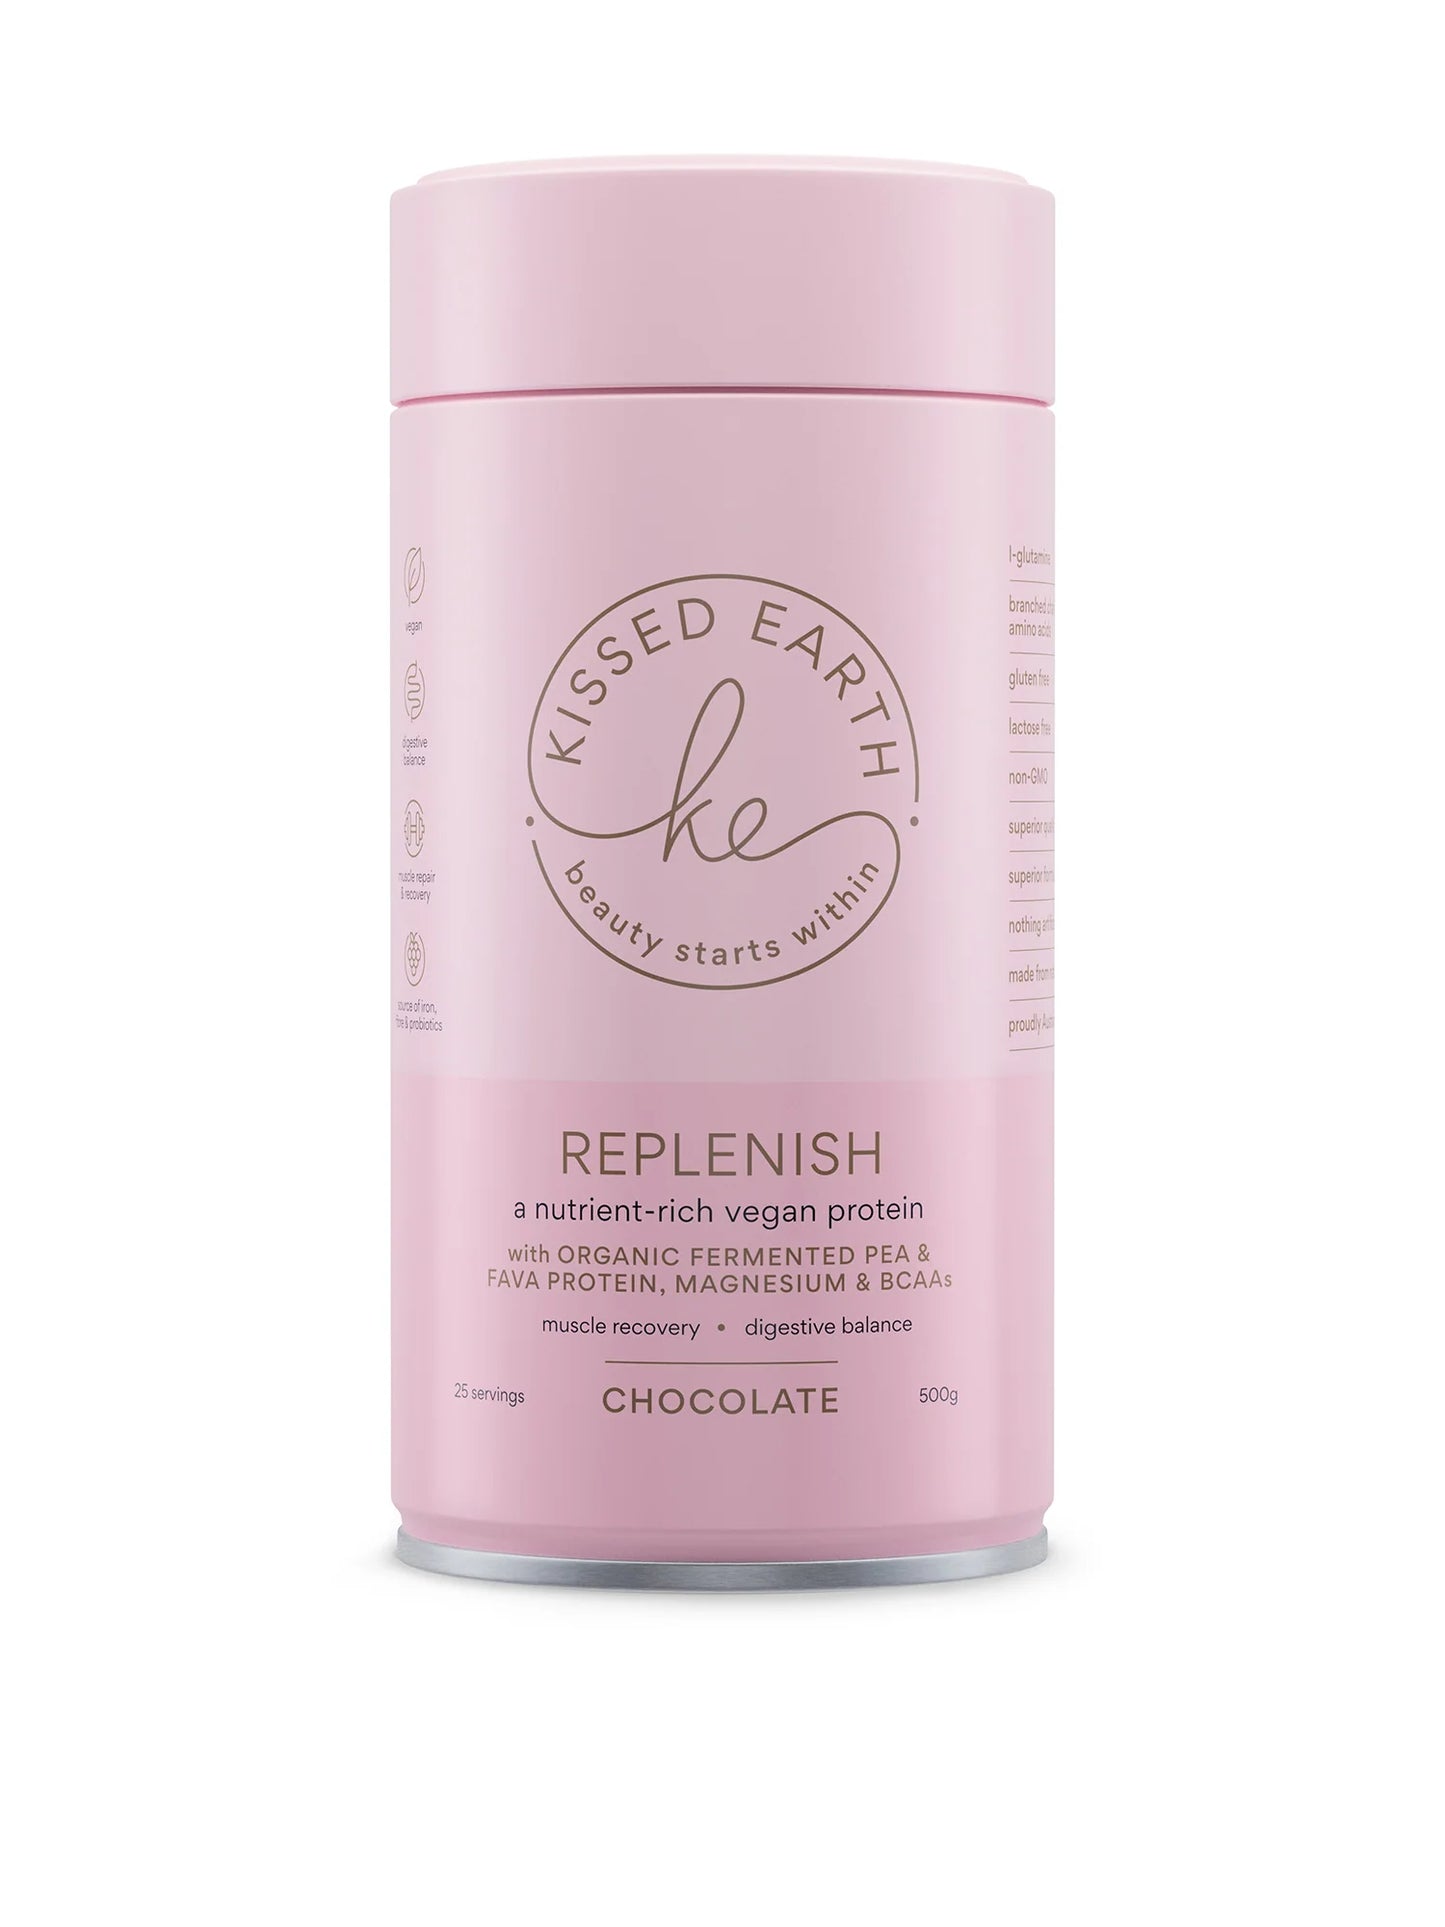 KISSED EARTH - Replenish Chocolate - BACK IN STOCK!